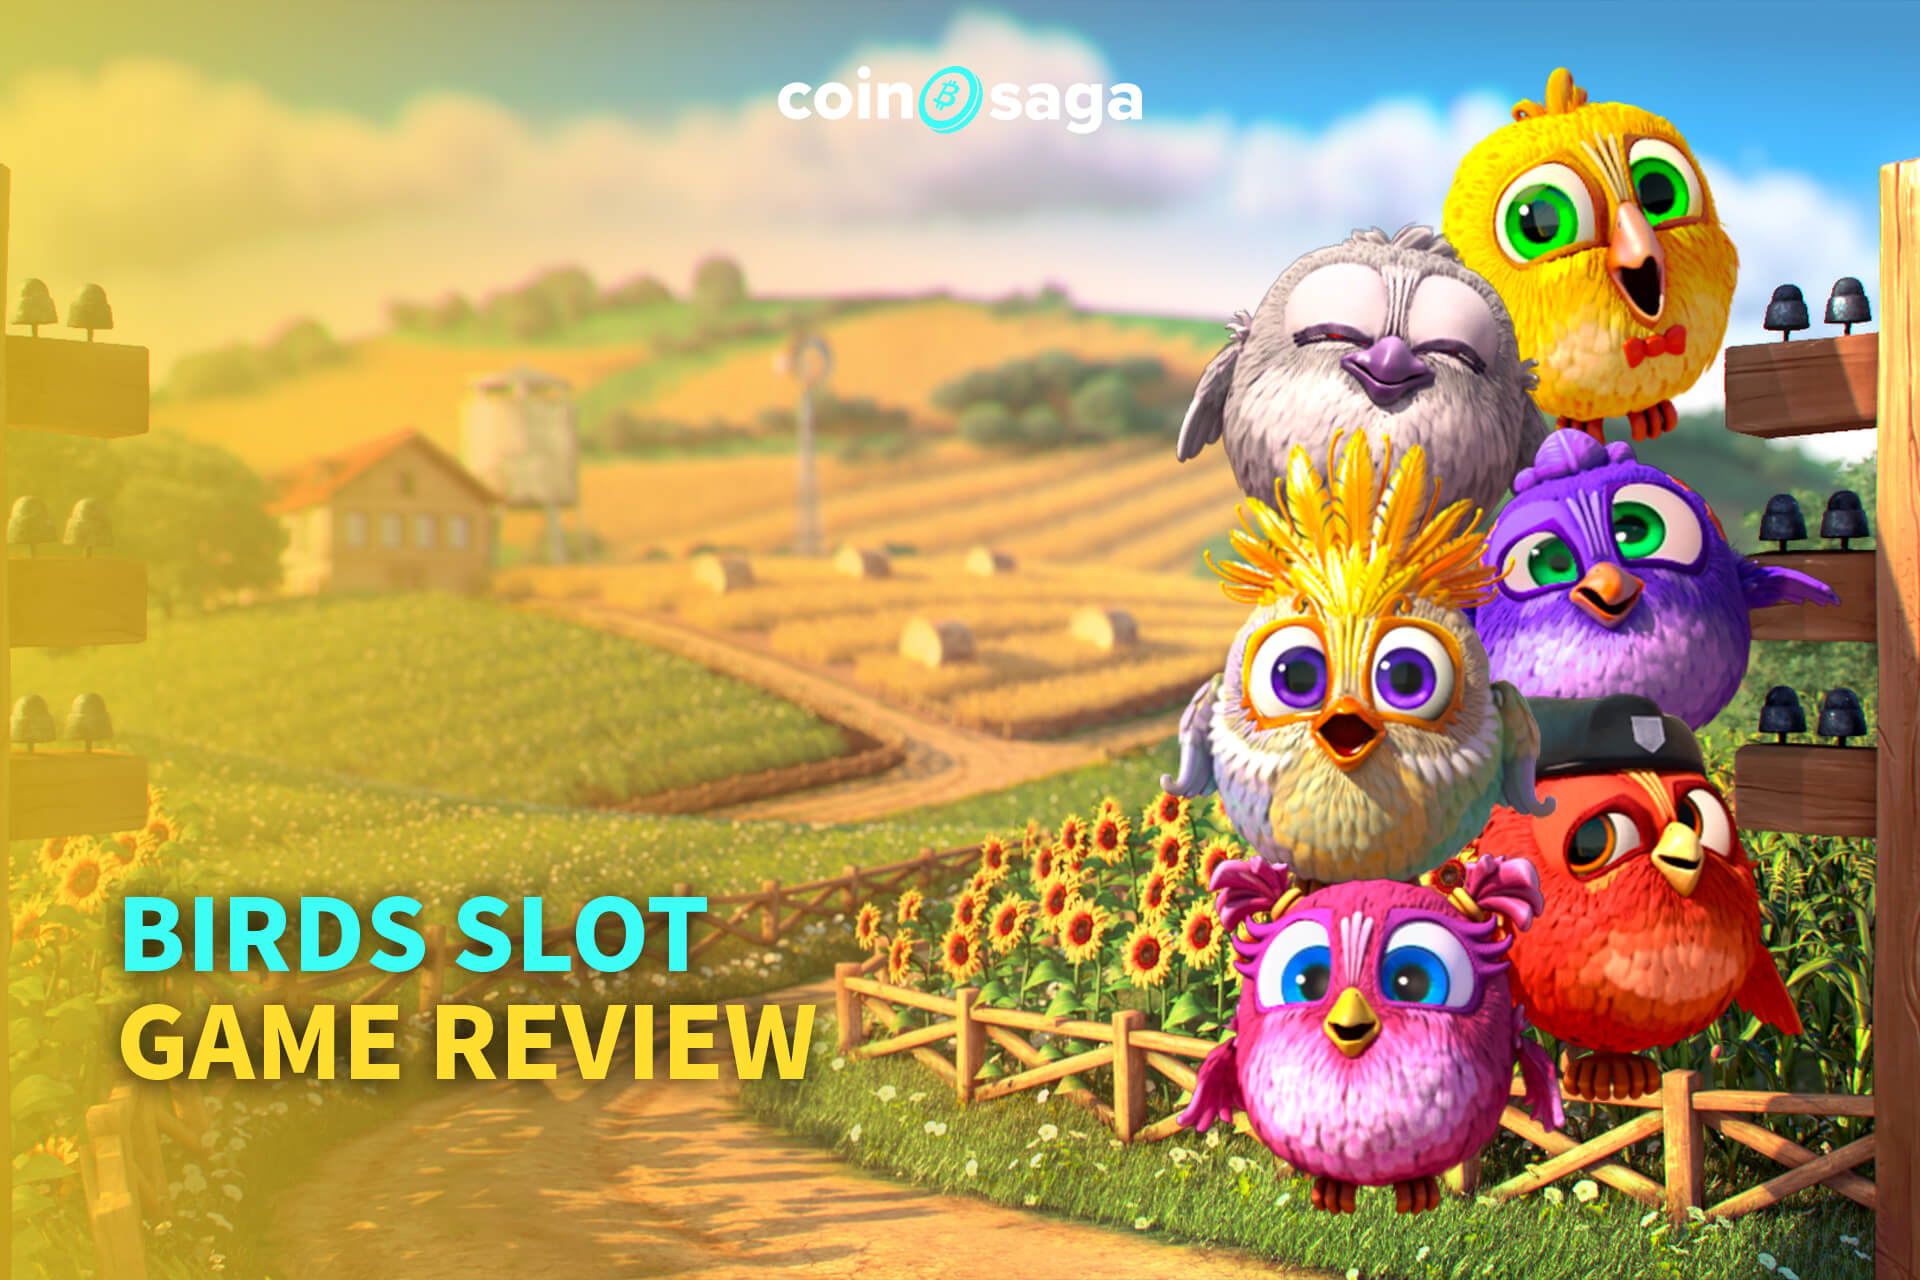 Birds Slot Game Review